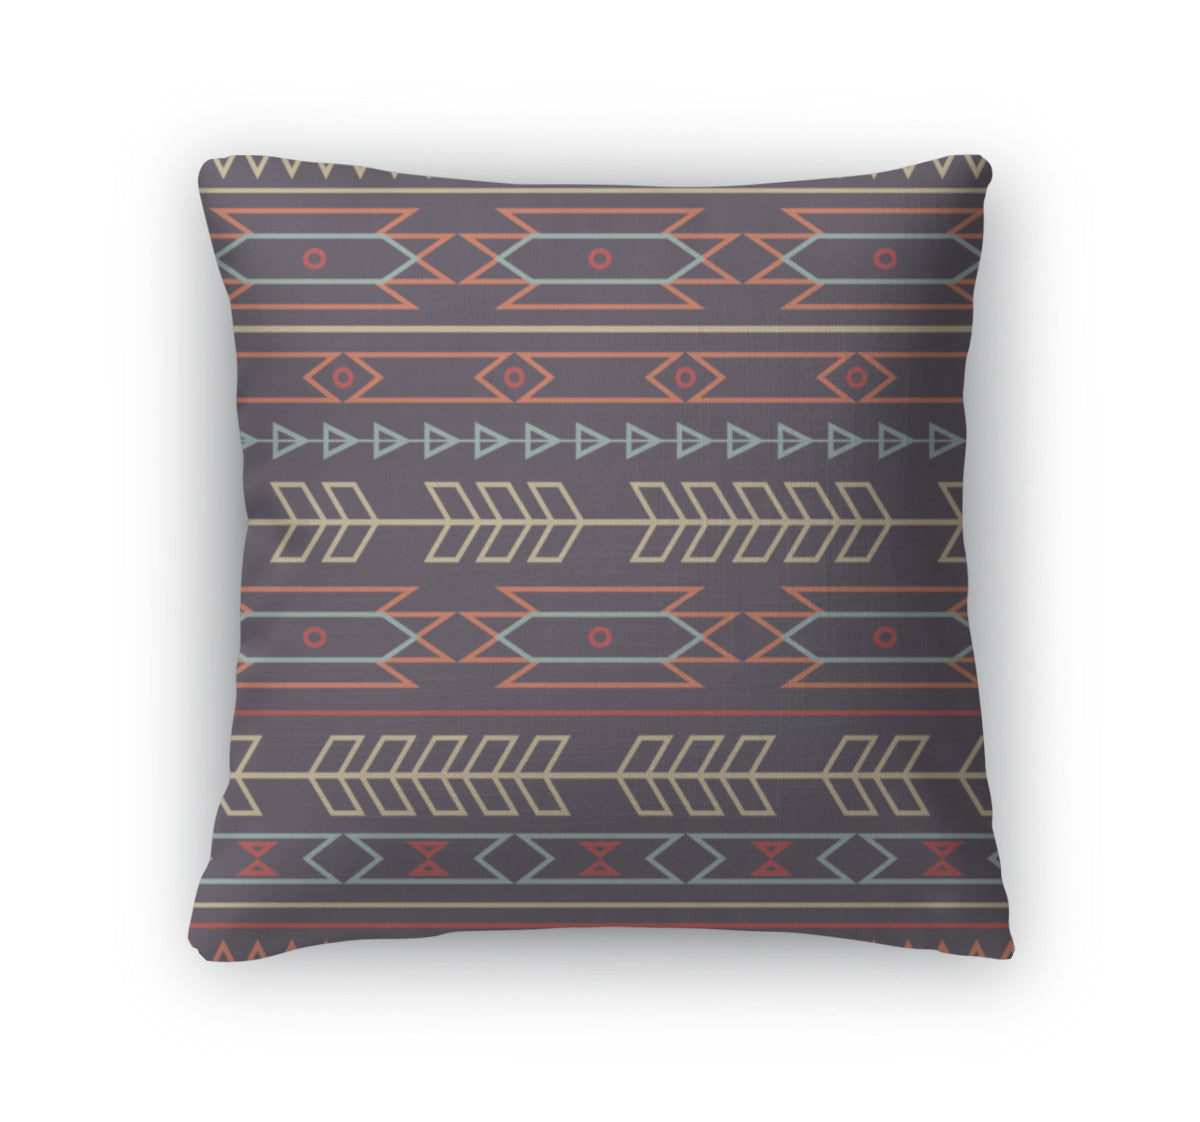 Throw Pillow, Colorful Decorative Ethnic Pattern